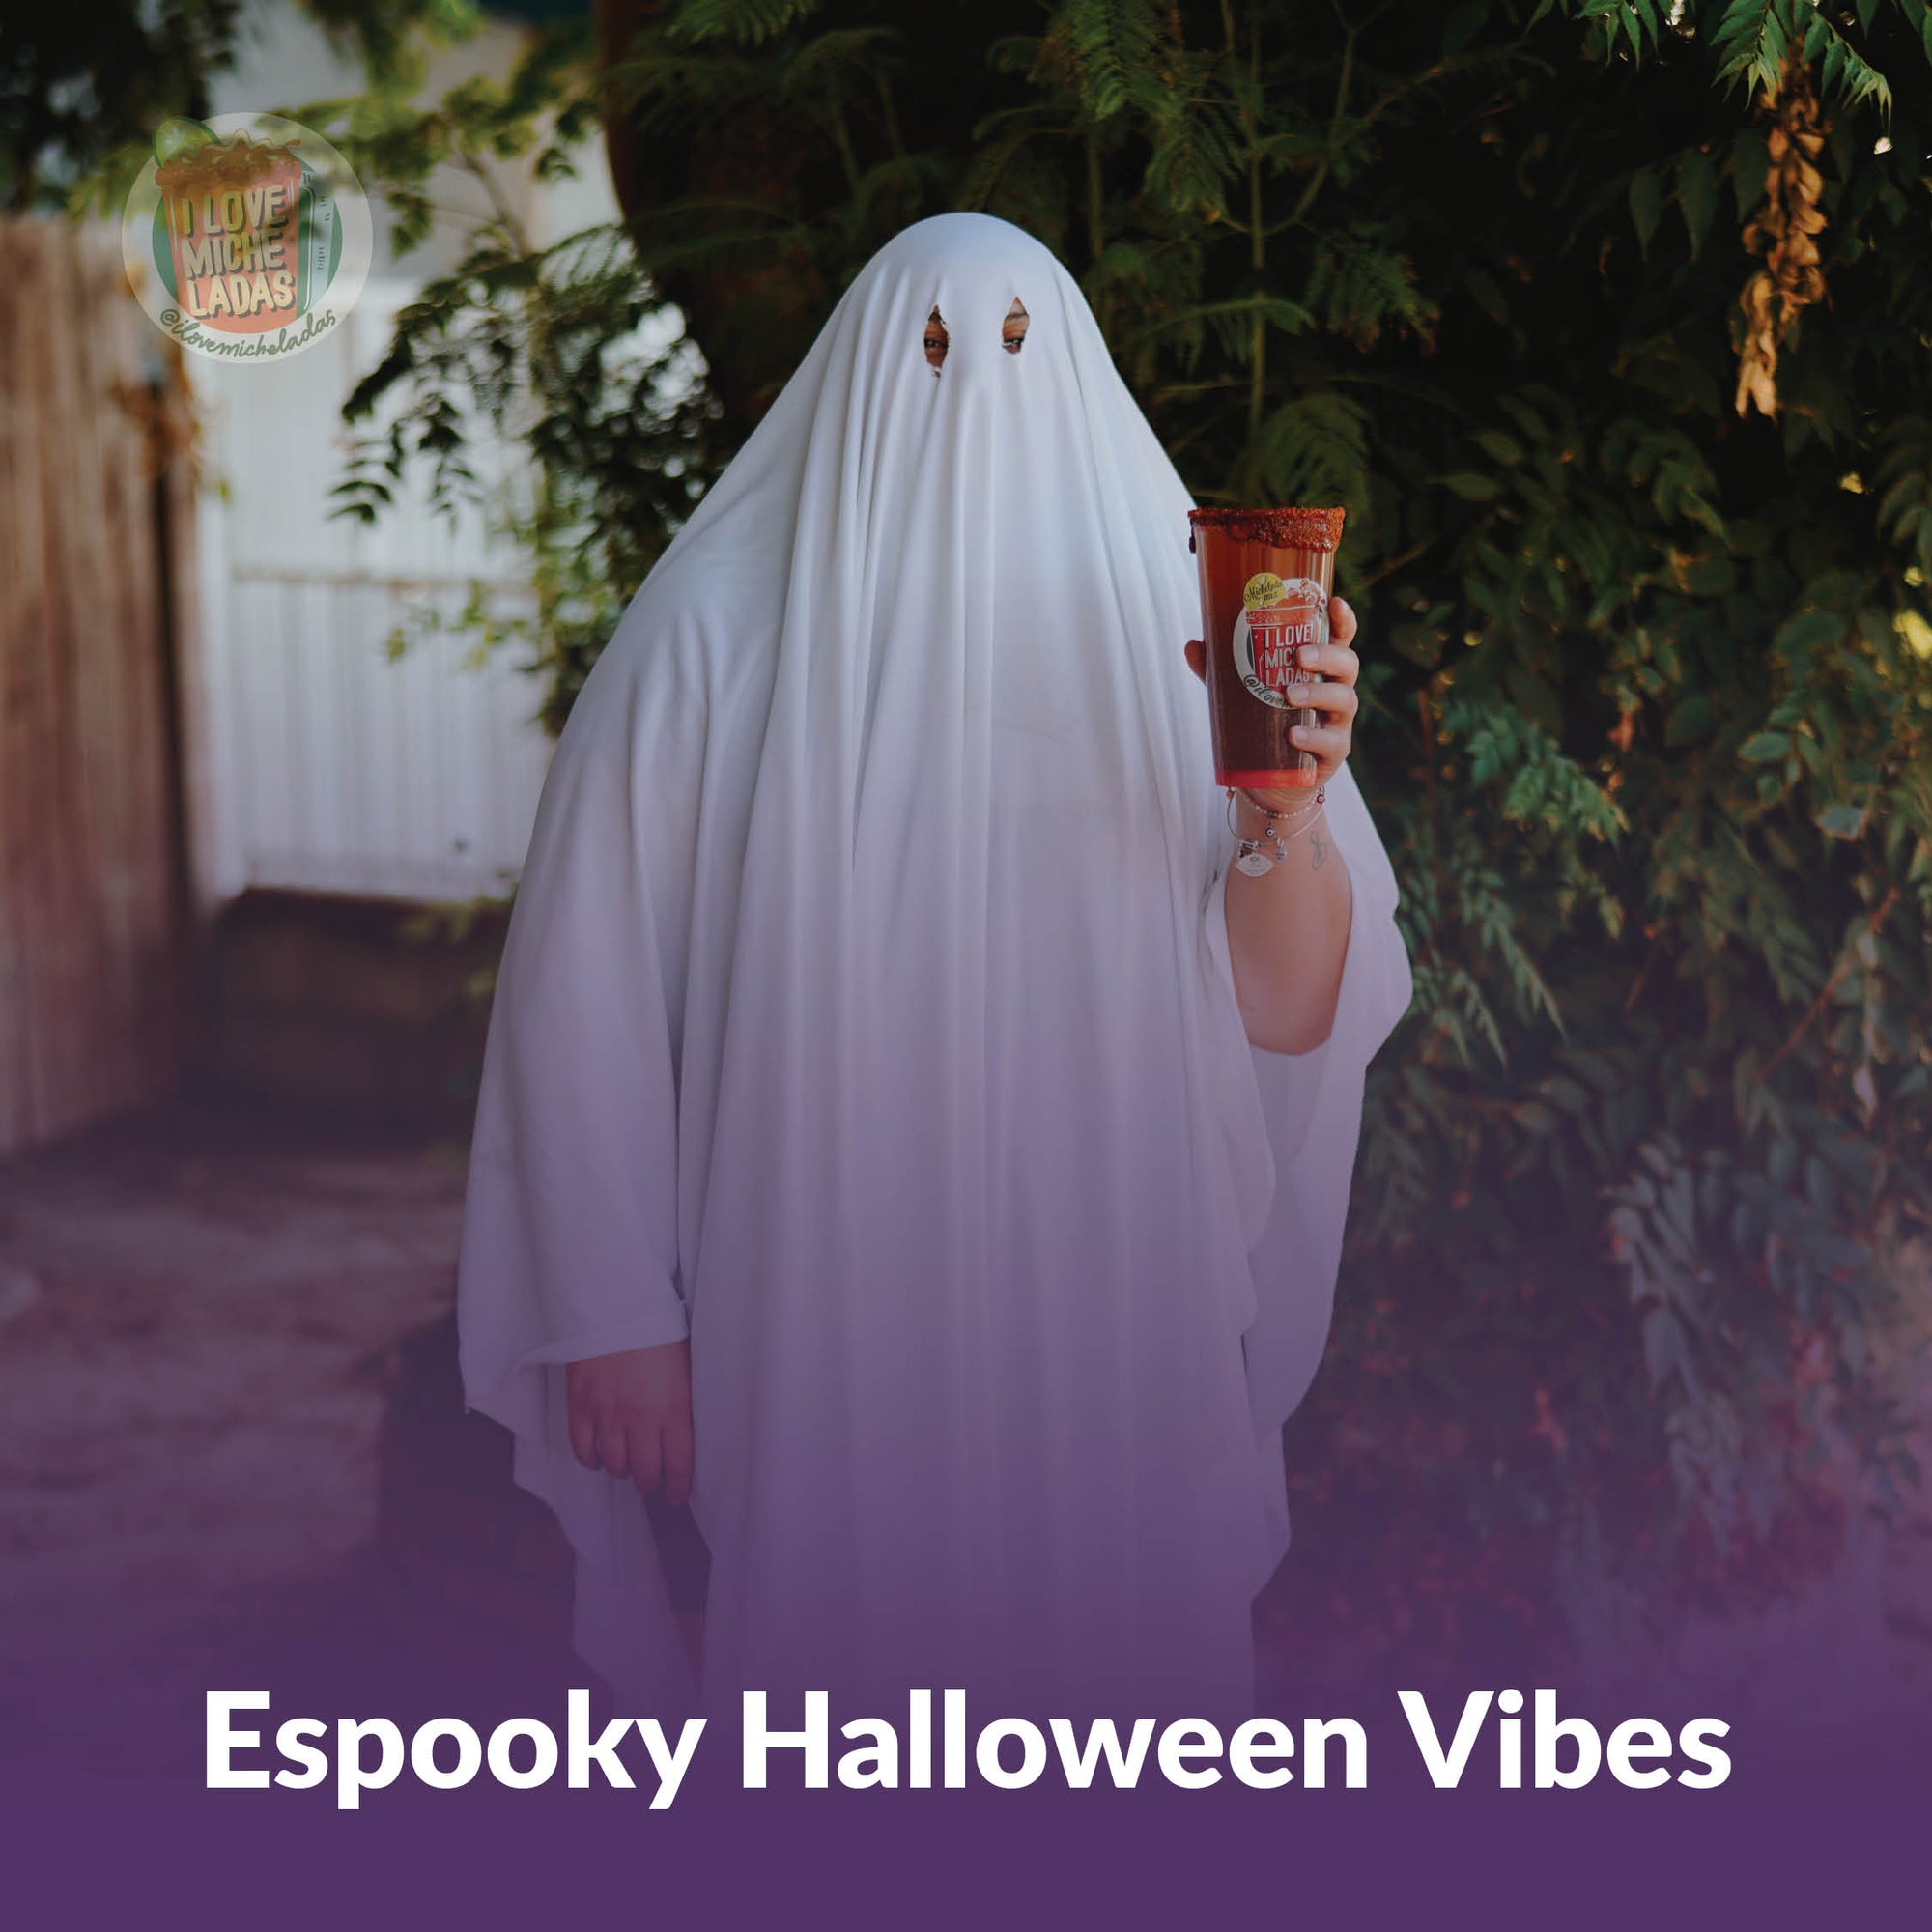 MICHE MIX OF THE WEEK: THE ONE WITH THE ESPOOKY HALLOWEEN VIBES